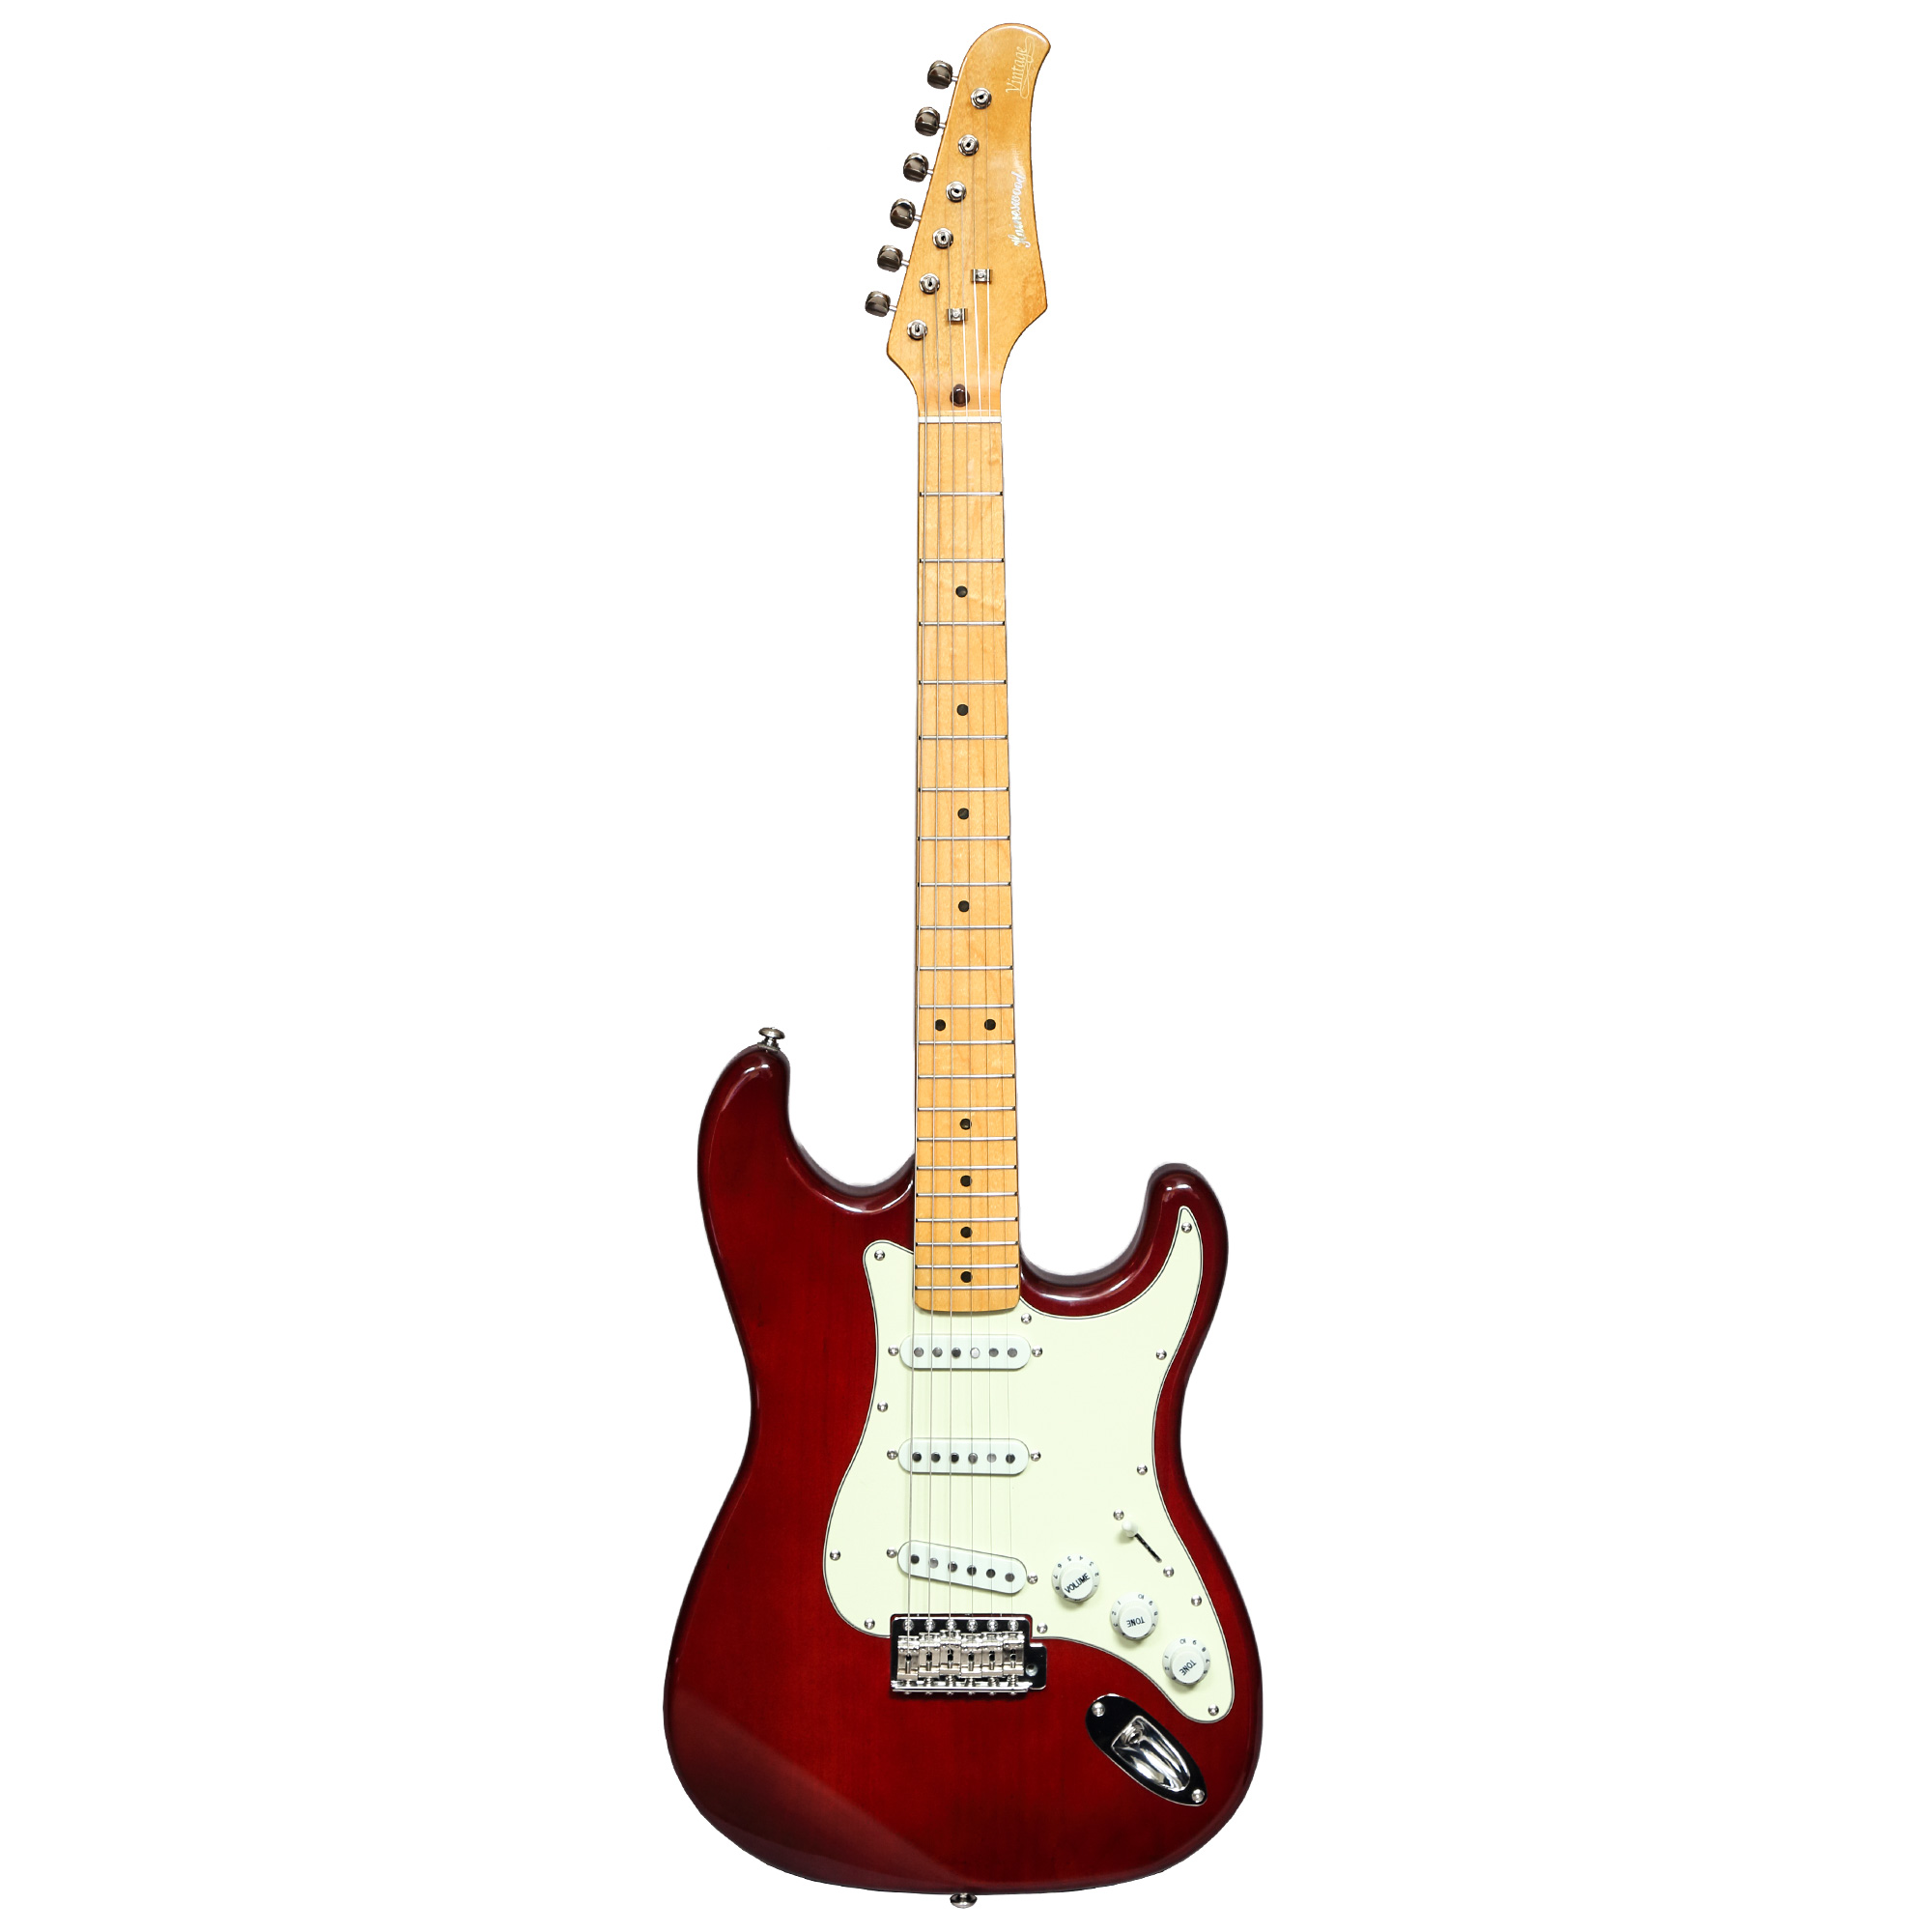 Haineswood Expedition Series ST-H-WRD Strat Electric Guitar (Wine Red)